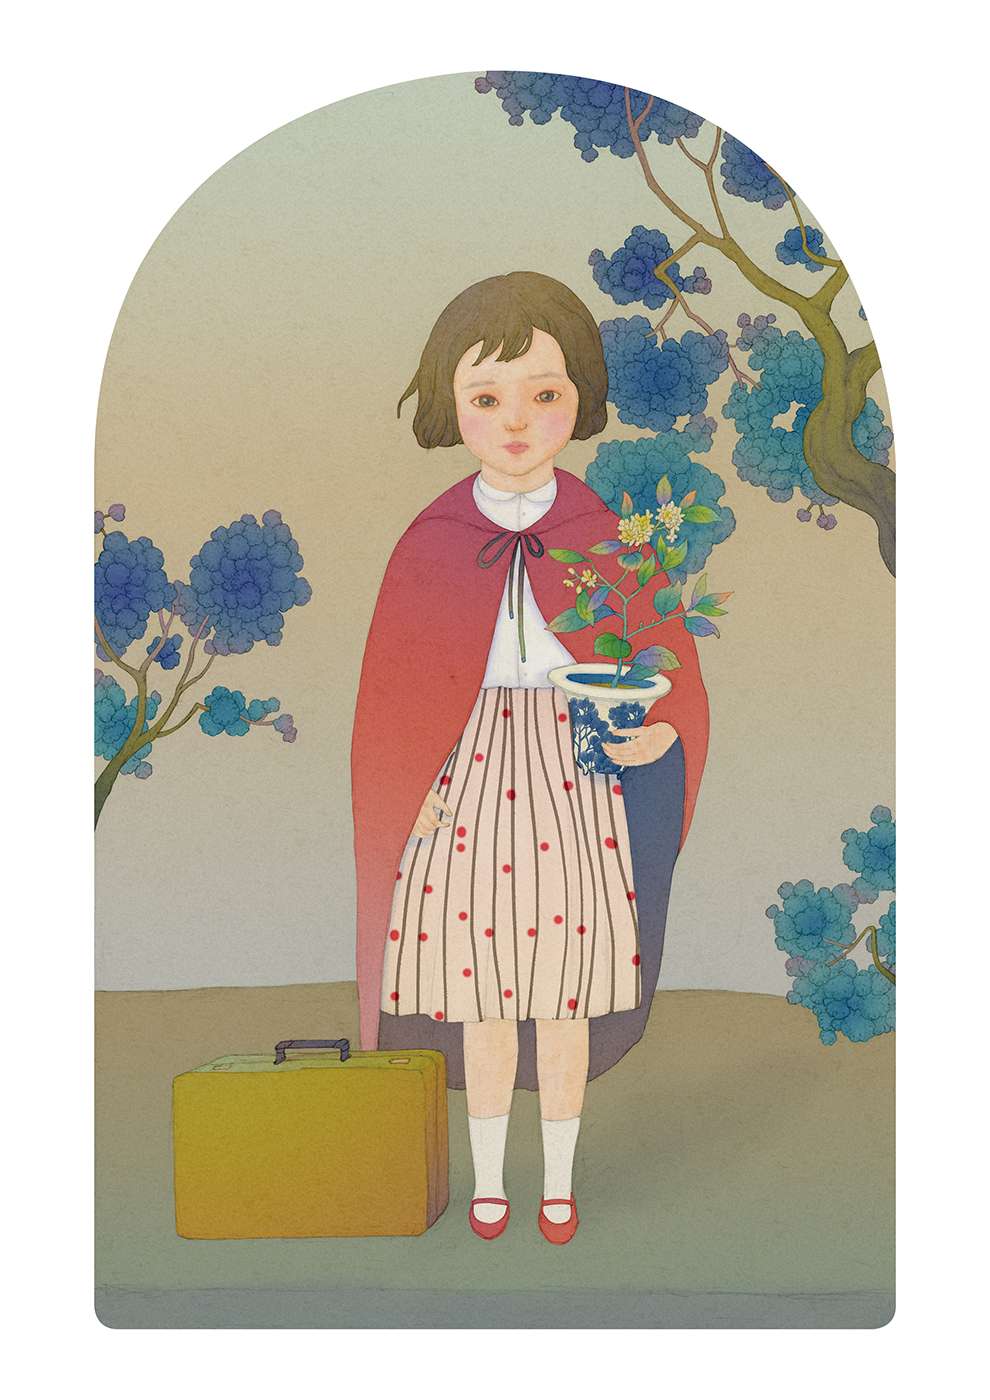 Whooli Chen, Delicate hand-painted illustration of a little girl holding a plant